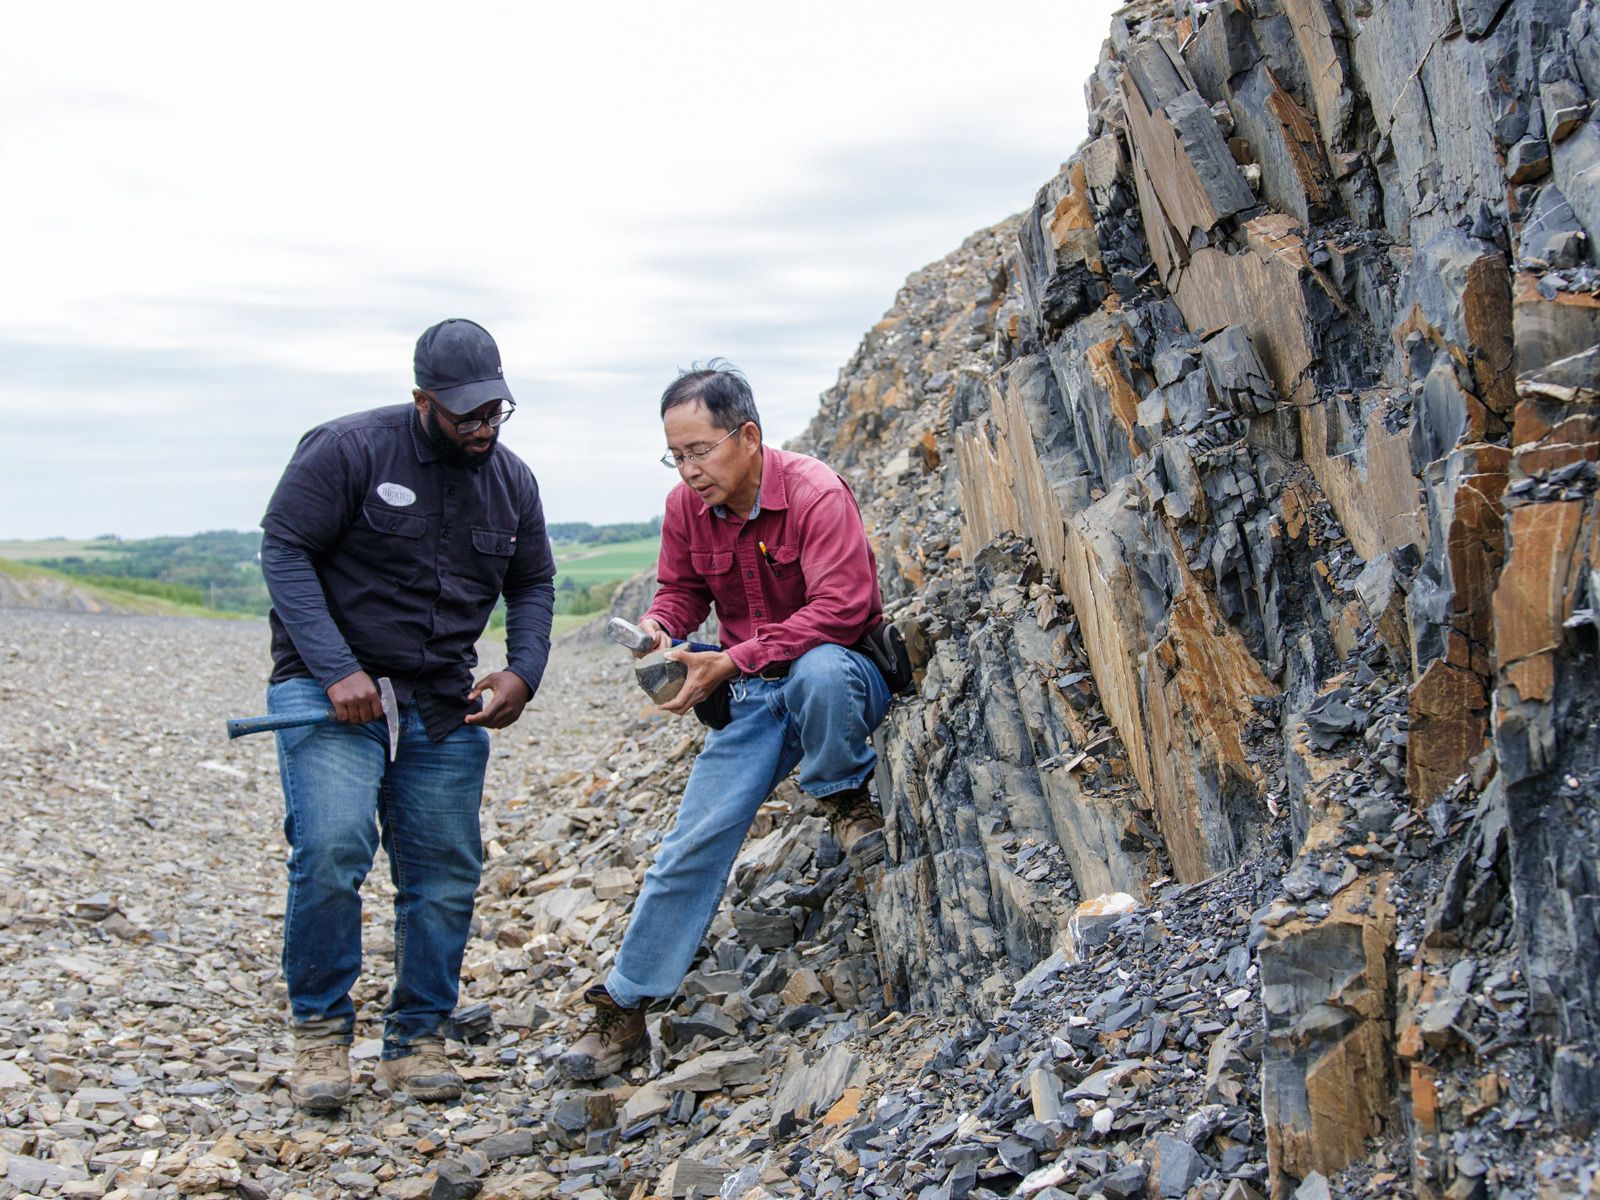 geology professor and student in the field inspecting rocks